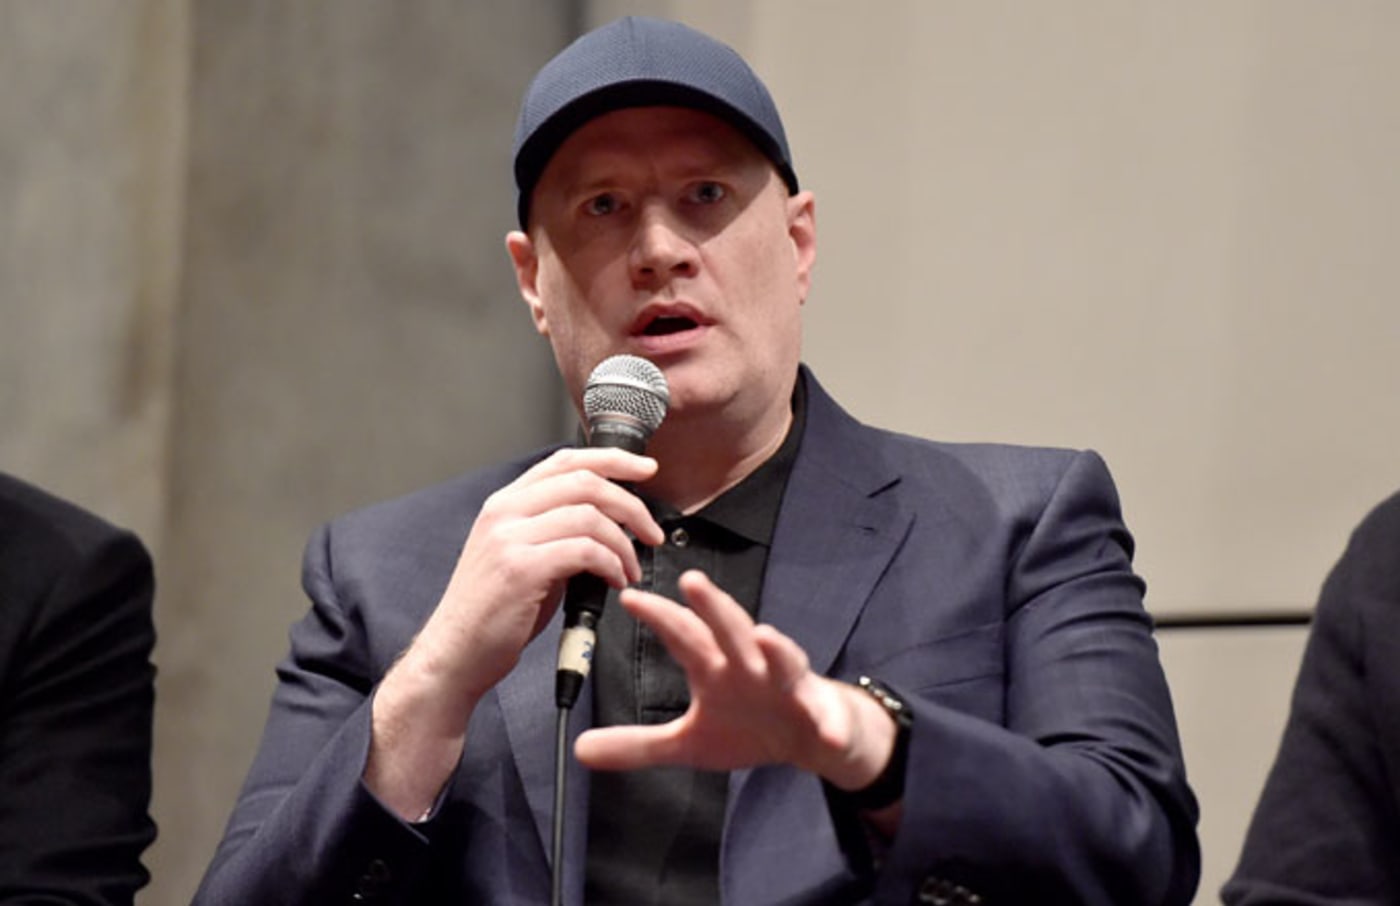 Kevin Feige at the Producers Guild Awards